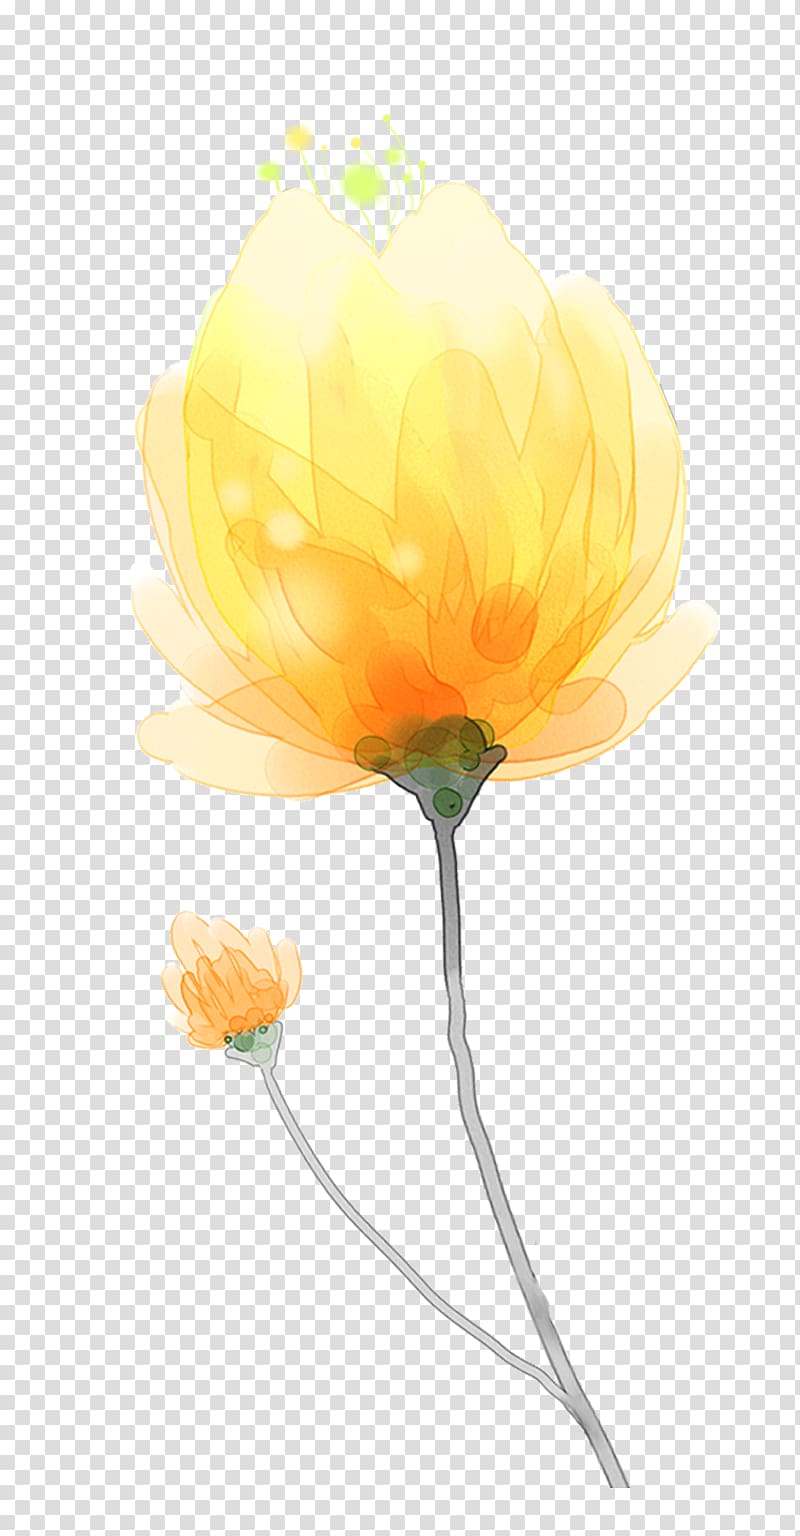 yellow hand-painted watercolor flower decoration pattern transparent background PNG clipart